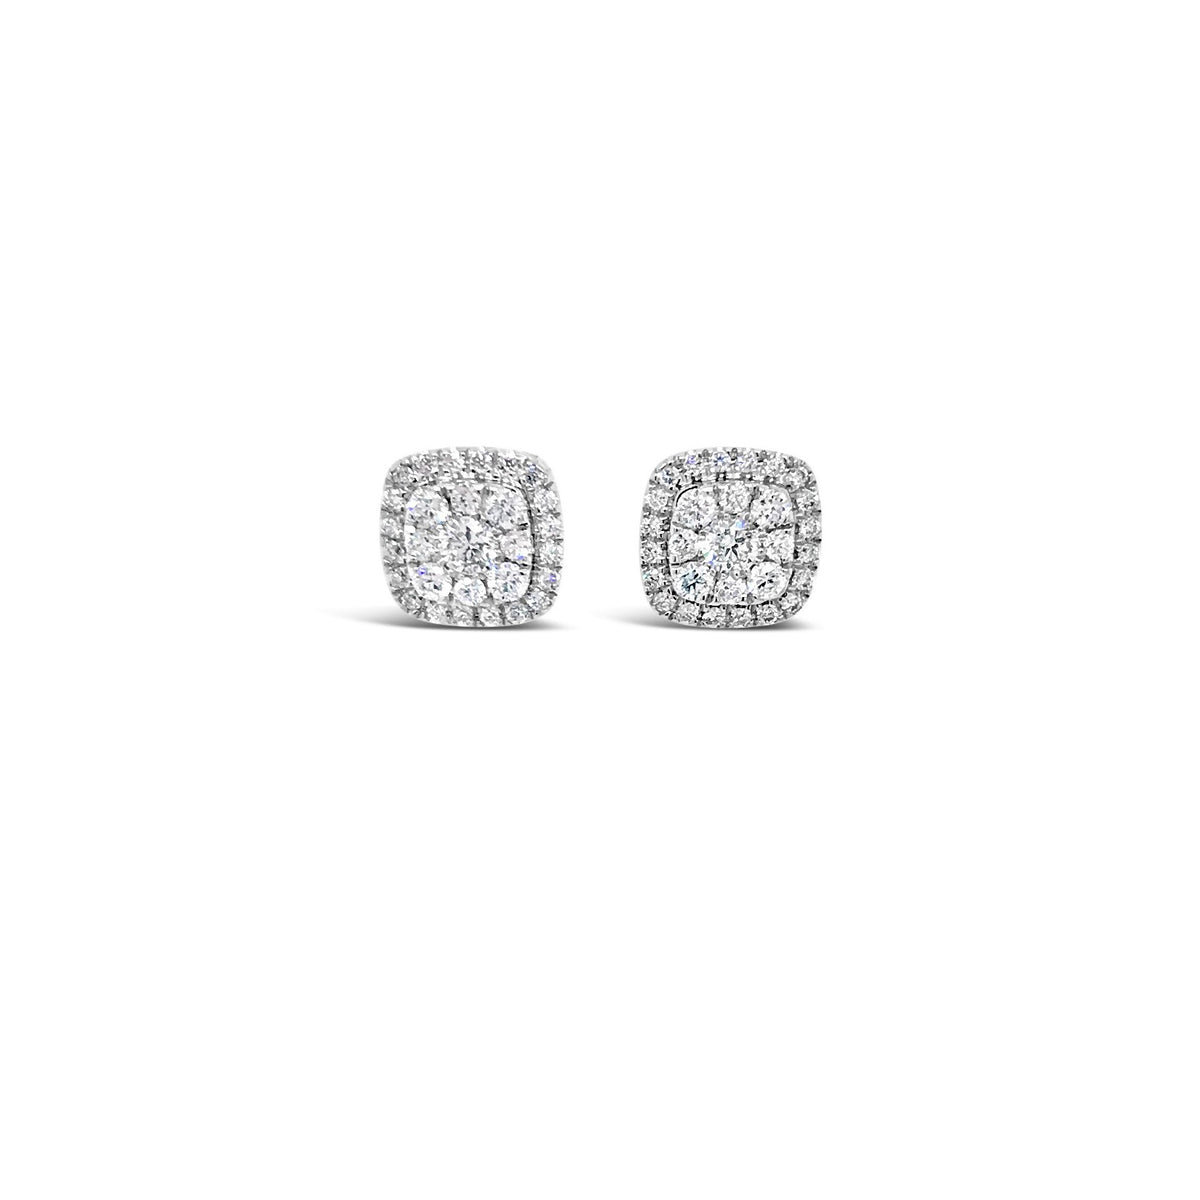 White gold cushion shaped diamond cluster earrings 0.51ct - Duffs Jewellers